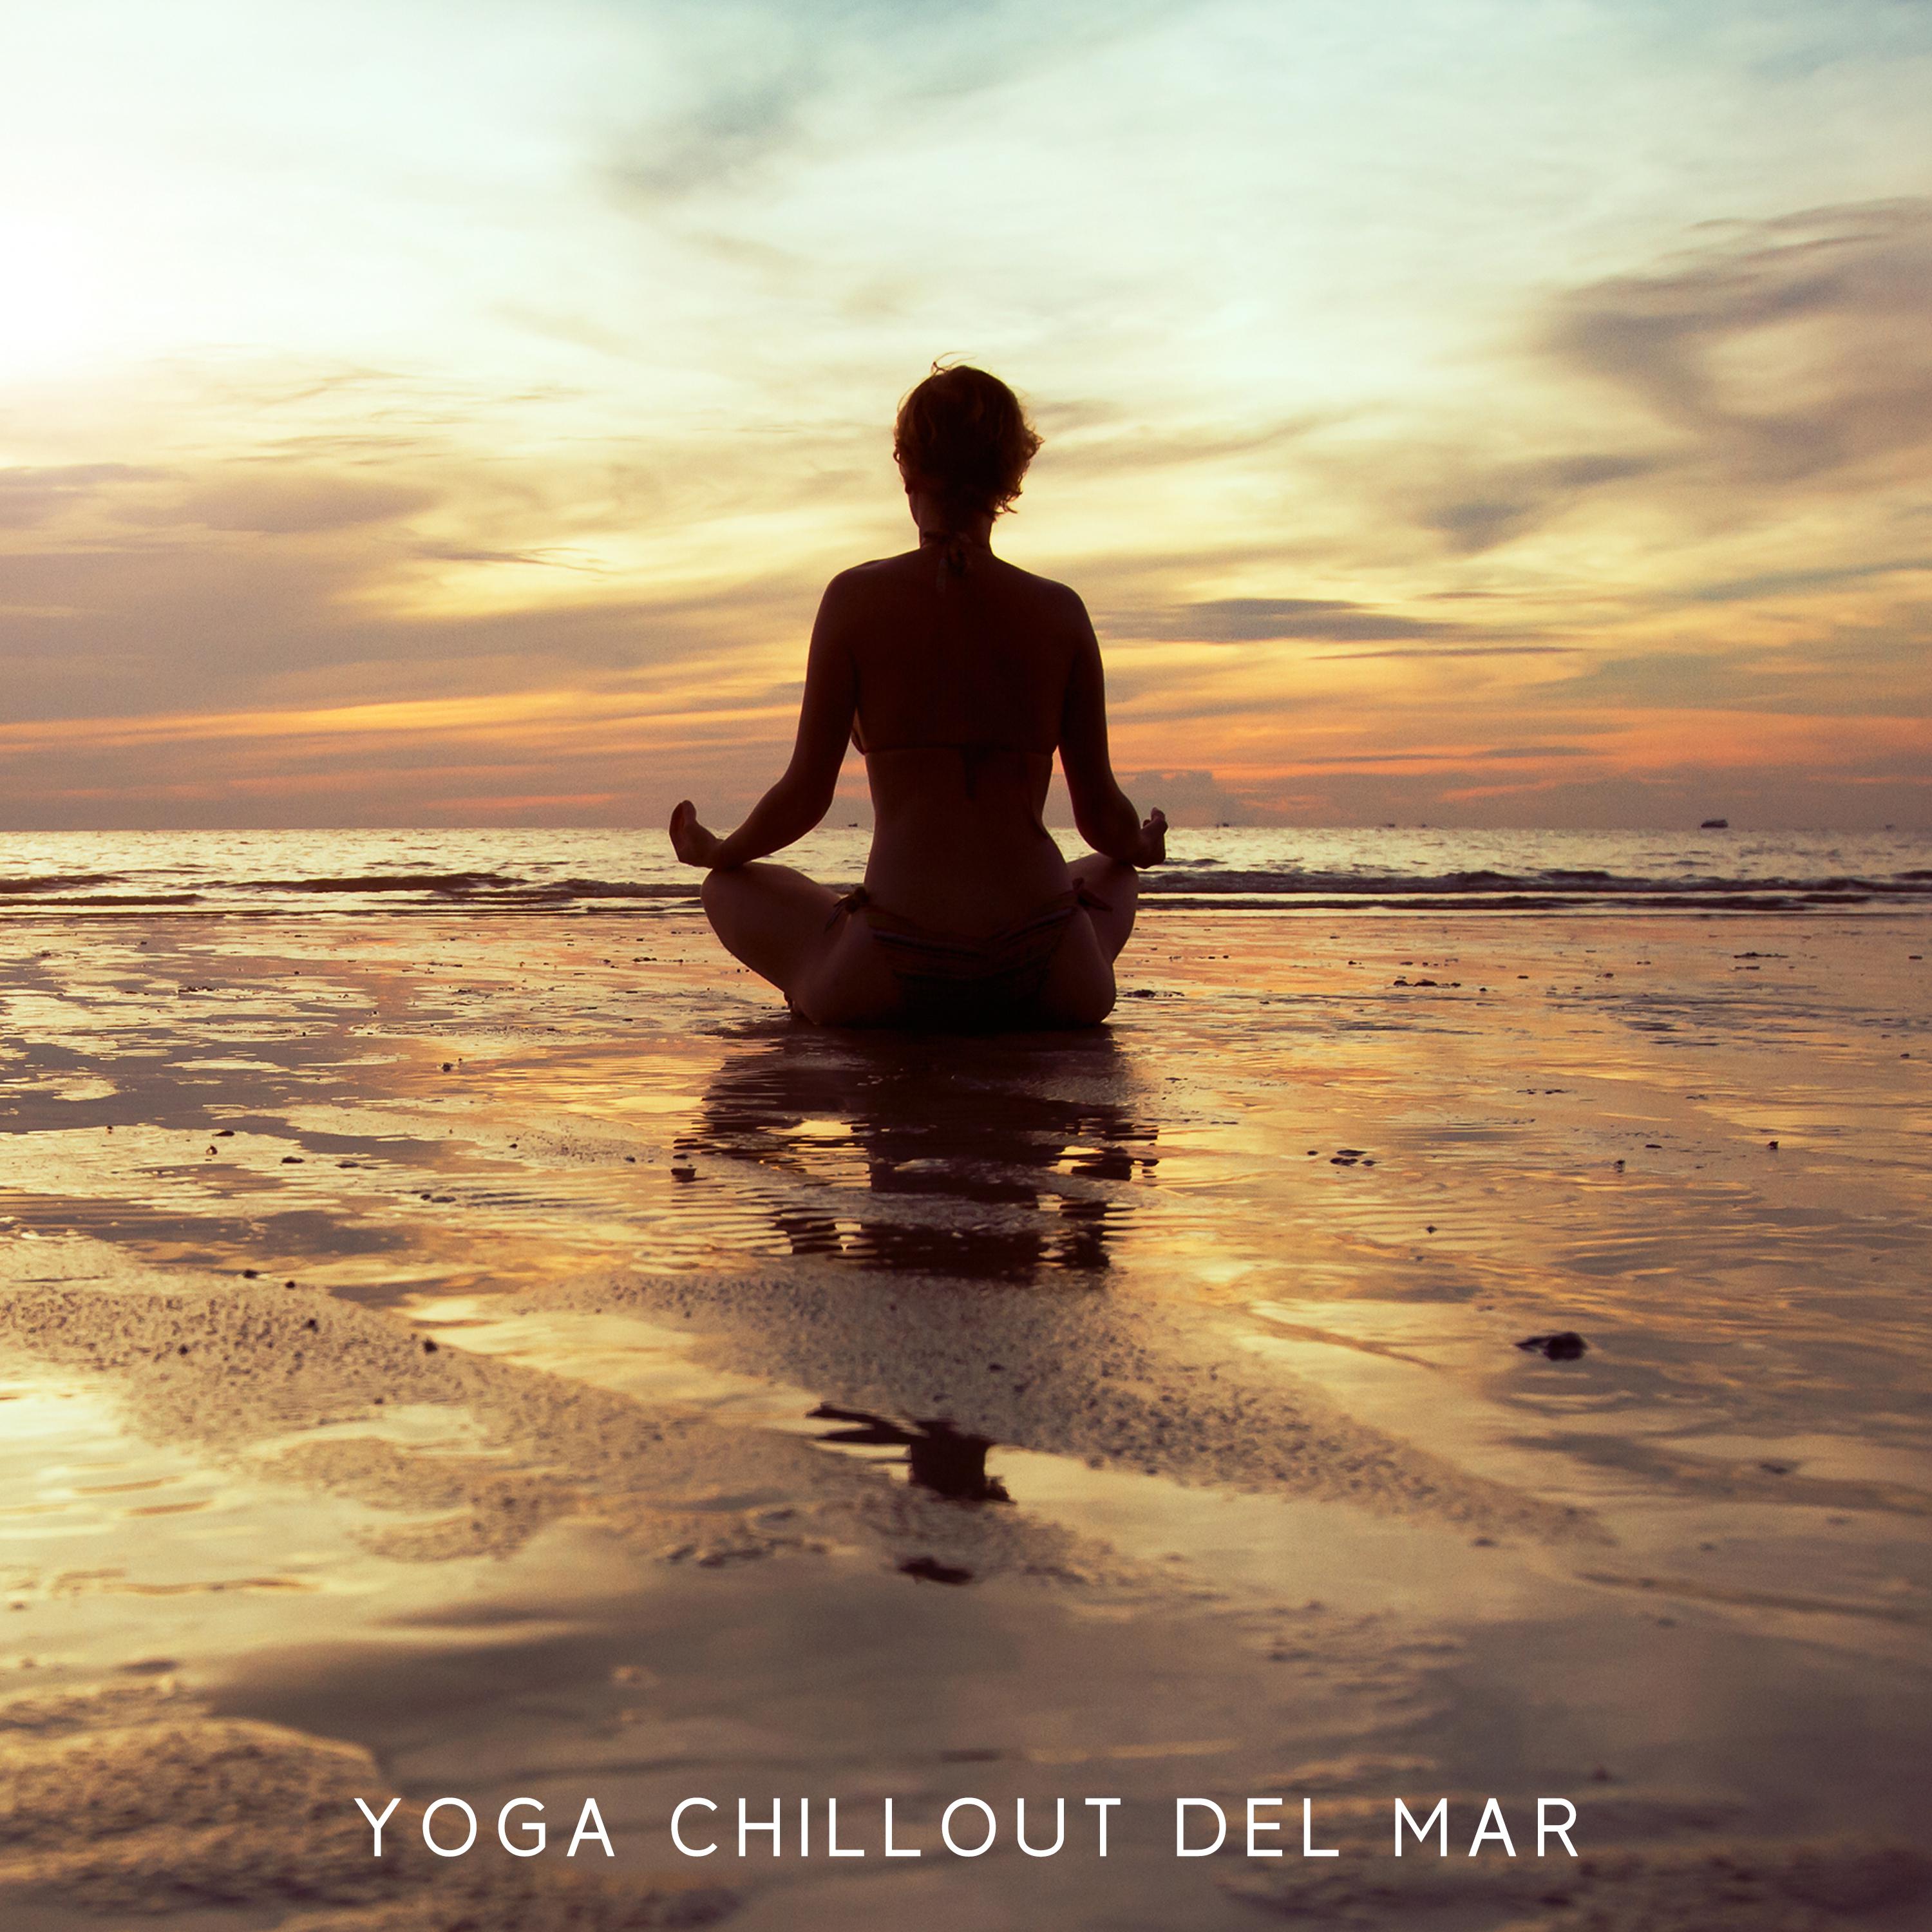 Yoga Chillout del Mar (Summer Meditation Music for Yoga Poses)